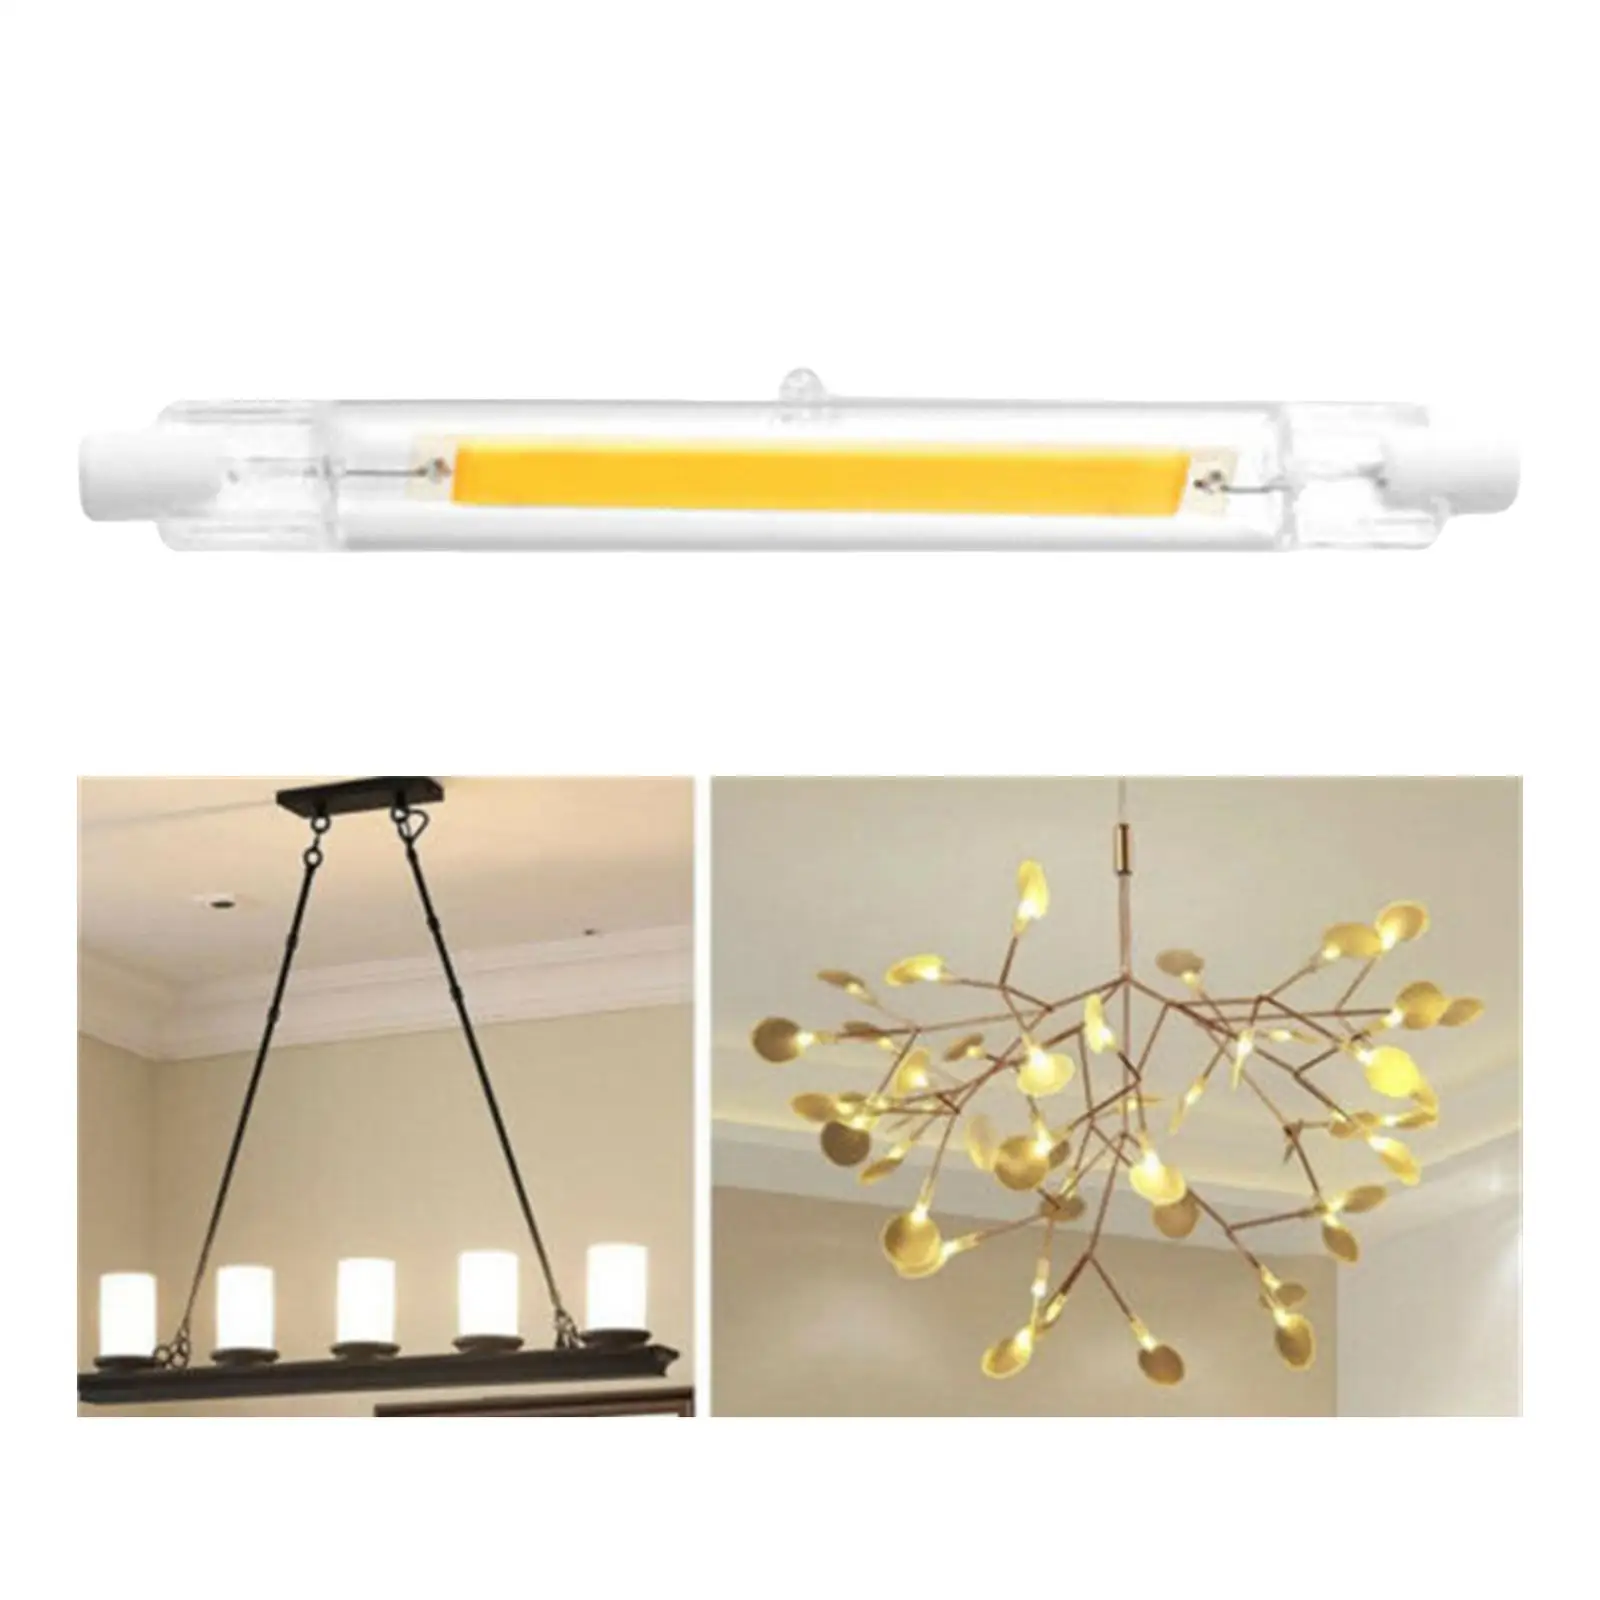 LED R7S Glass Tube COB Bulb Dimmable 3000K Corn Lamp for Garage Speciality Lighting